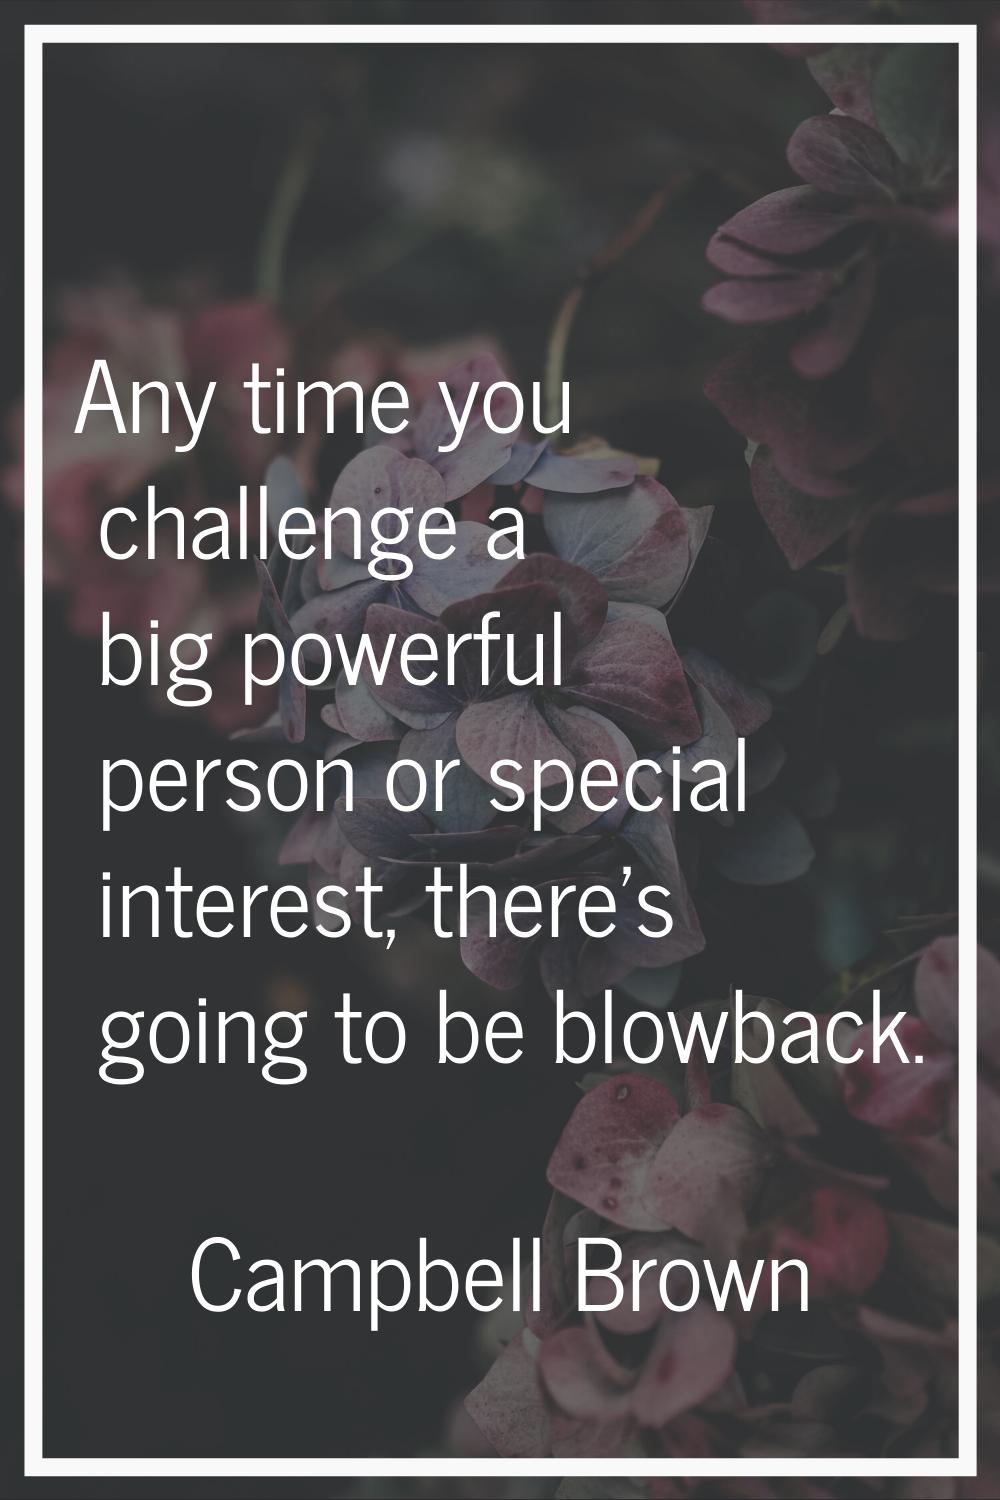 Any time you challenge a big powerful person or special interest, there's going to be blowback.